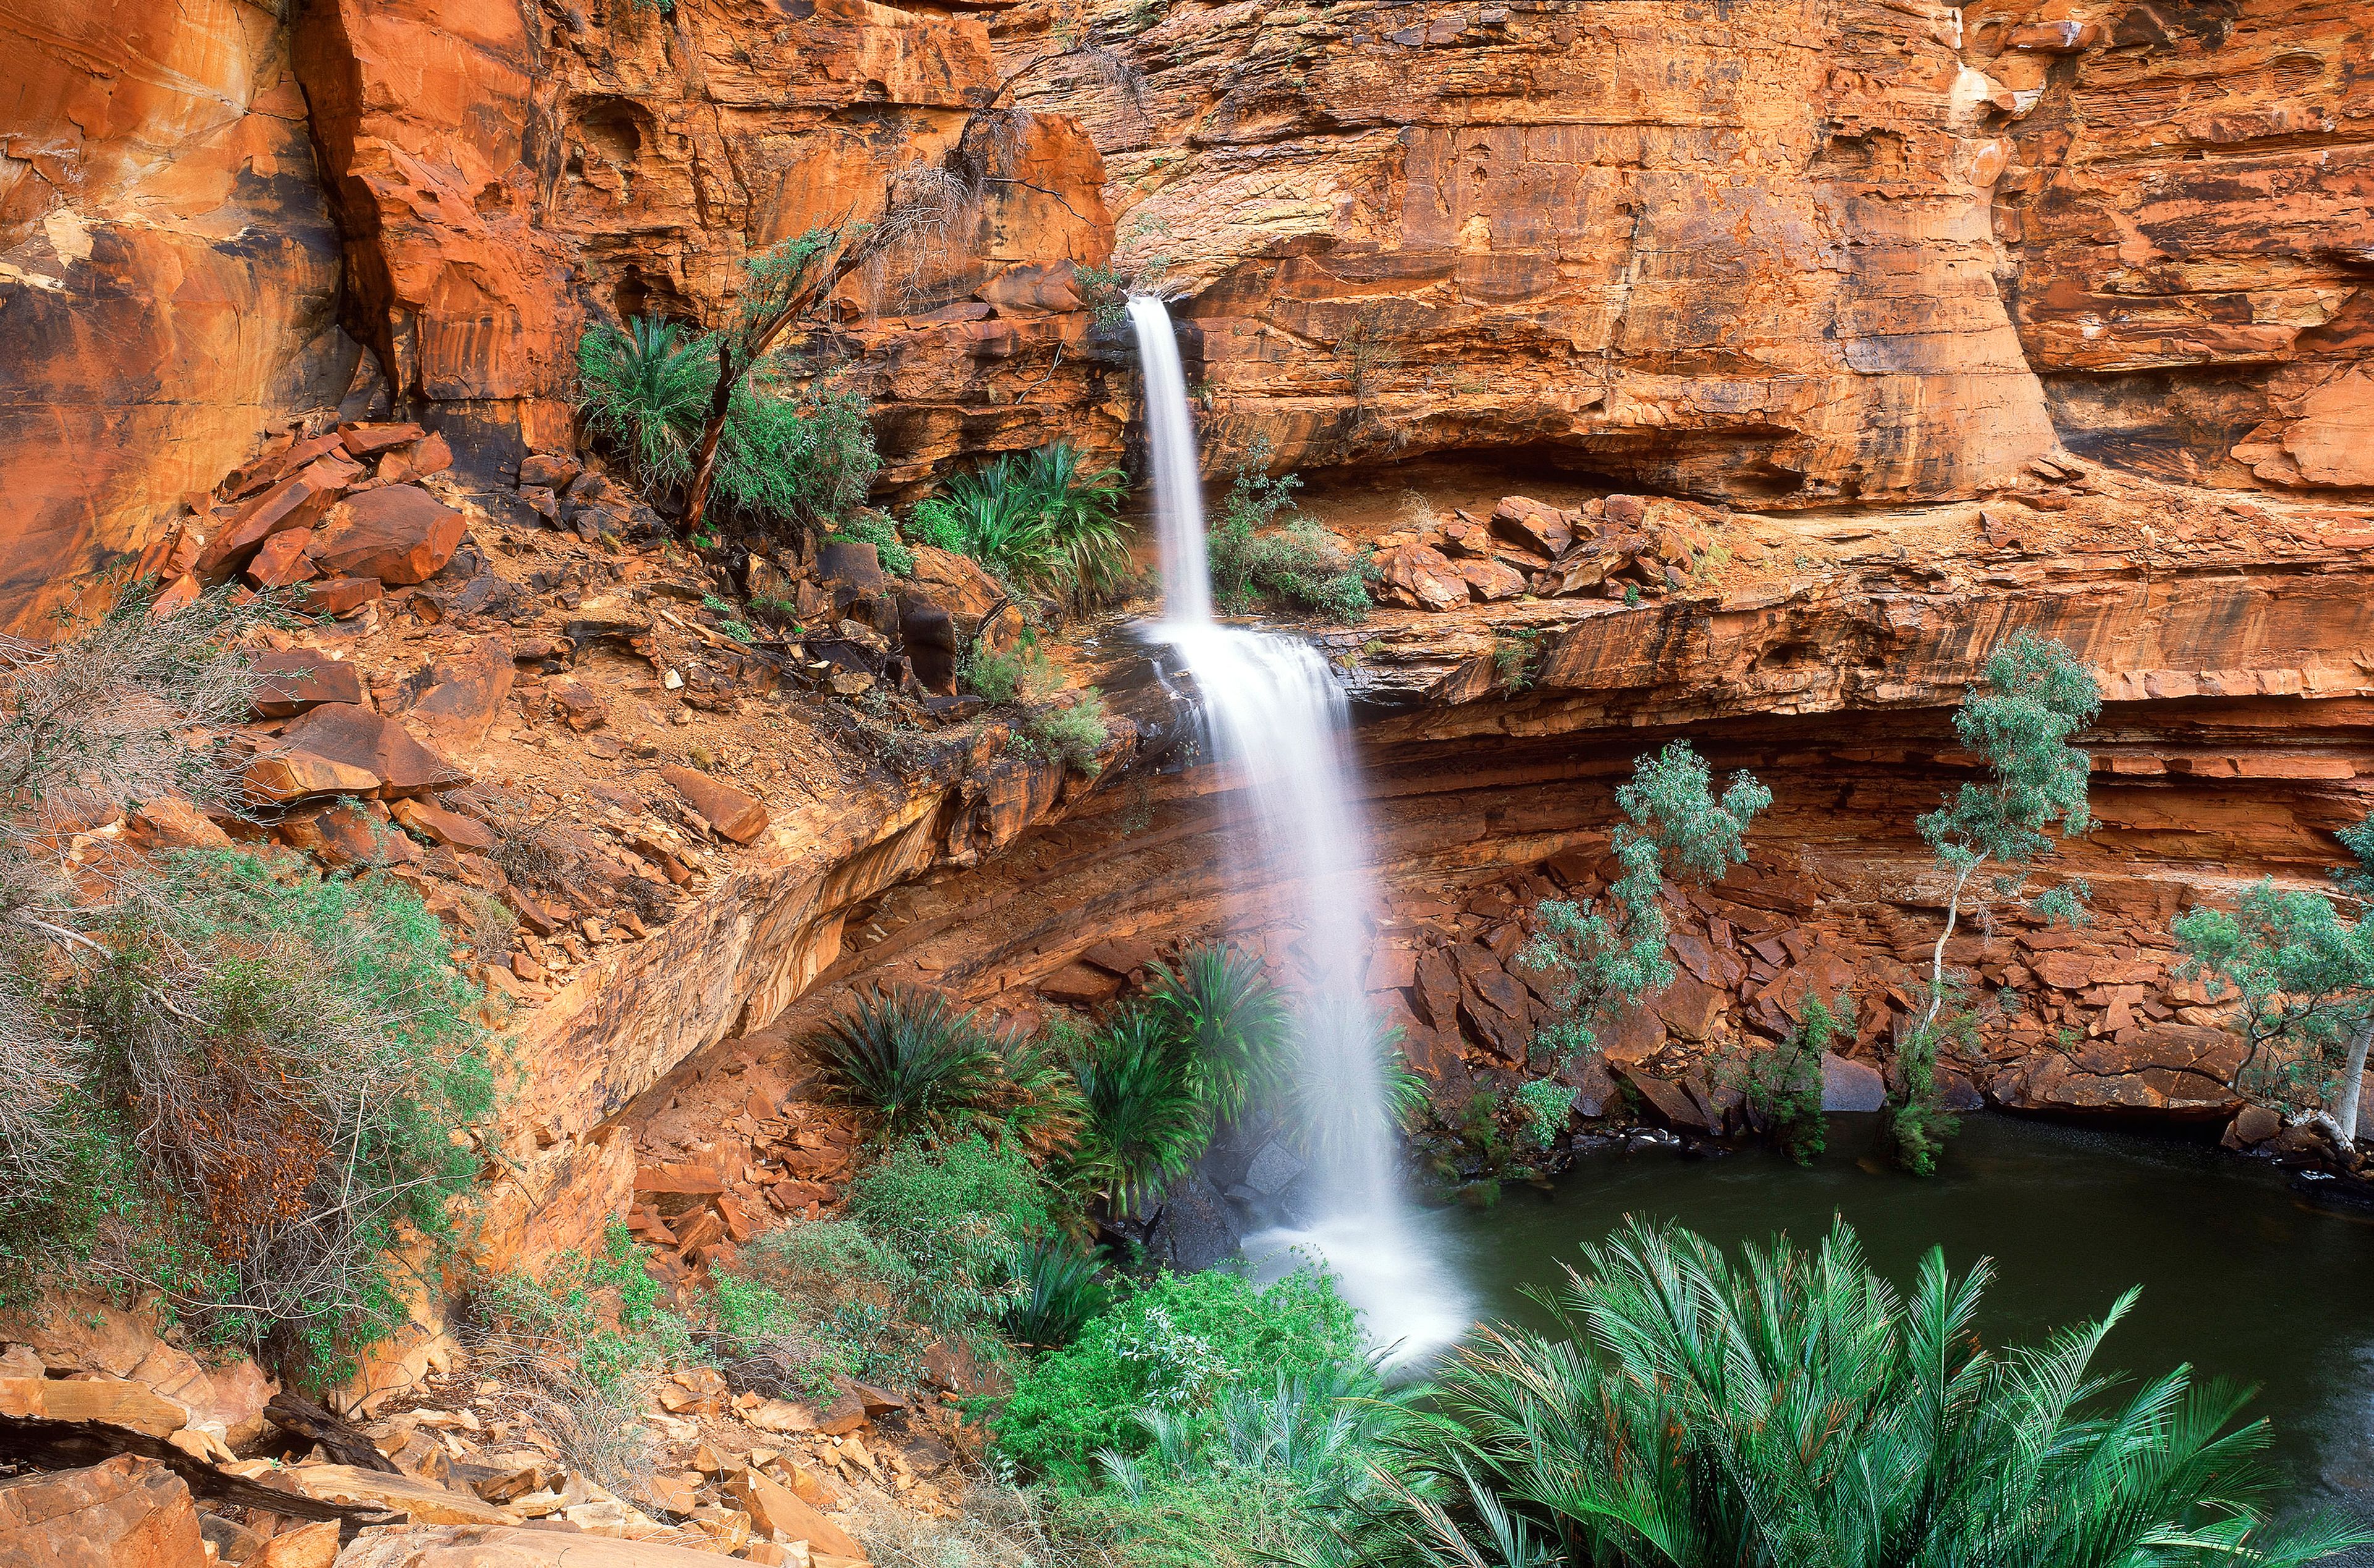 A thin waterfall of streaming white water surrounded by red rocky cliffs and a few deep green plants.